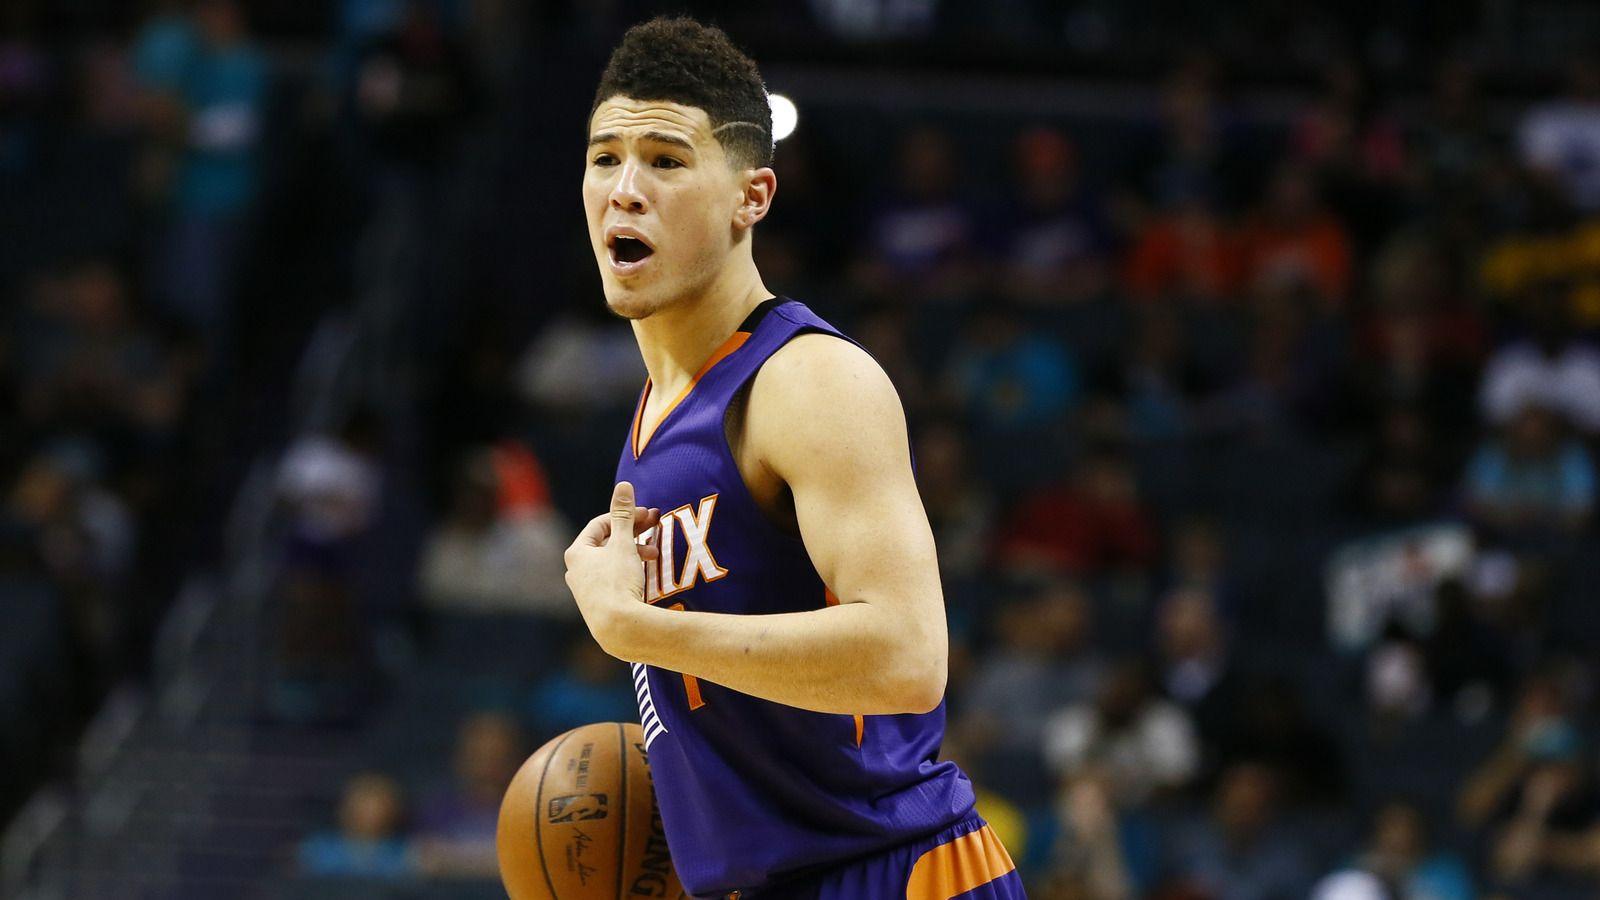 Why Devin Booker is the 39th best player in the NBA